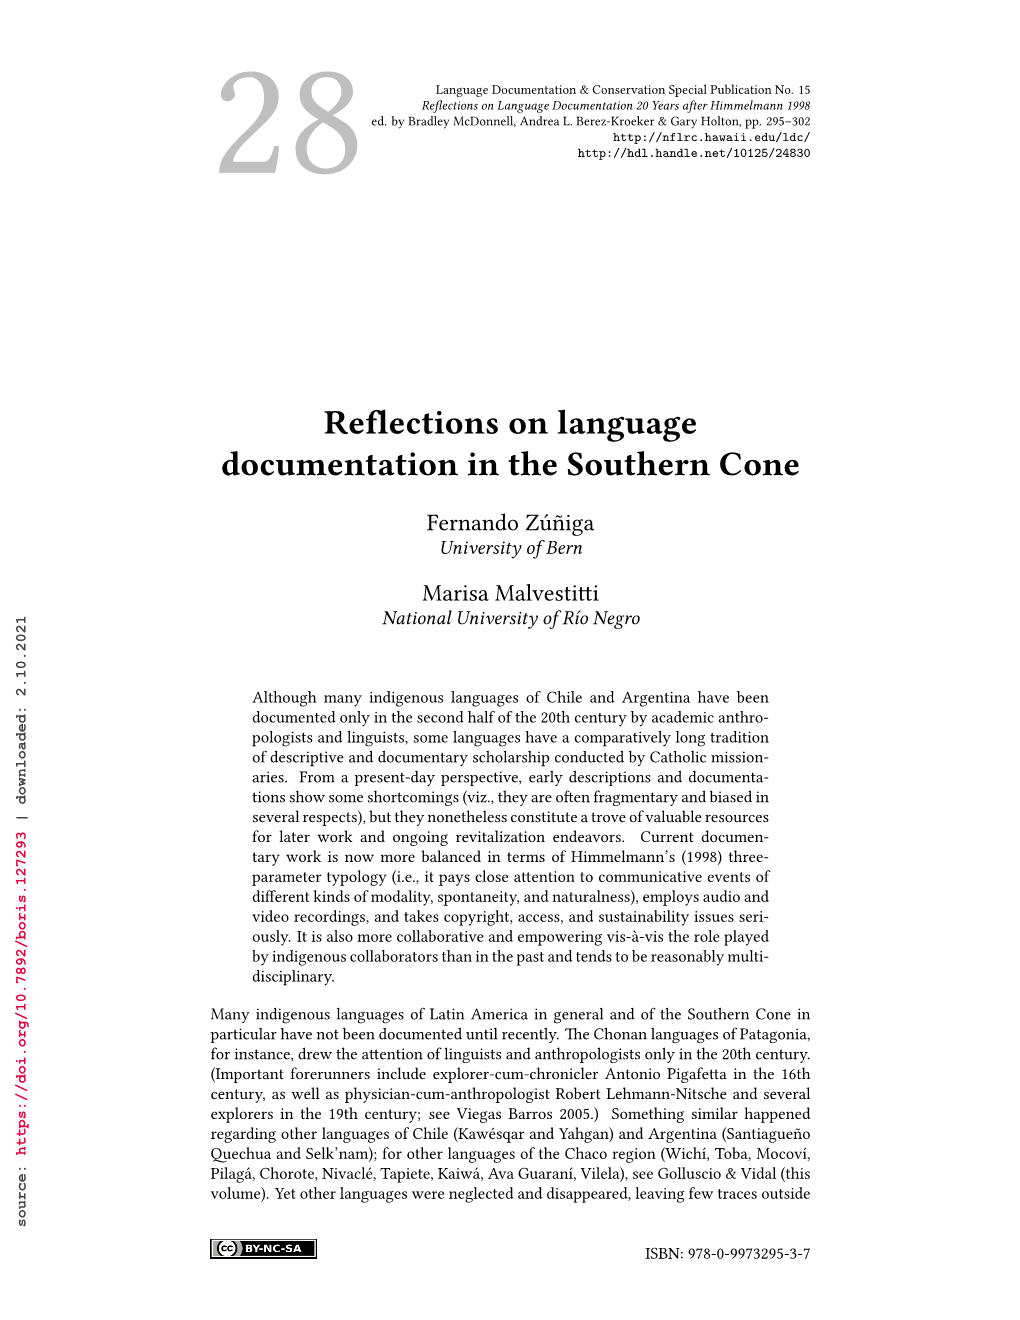 Reflections on Language Documentation in the Southern Cone 296